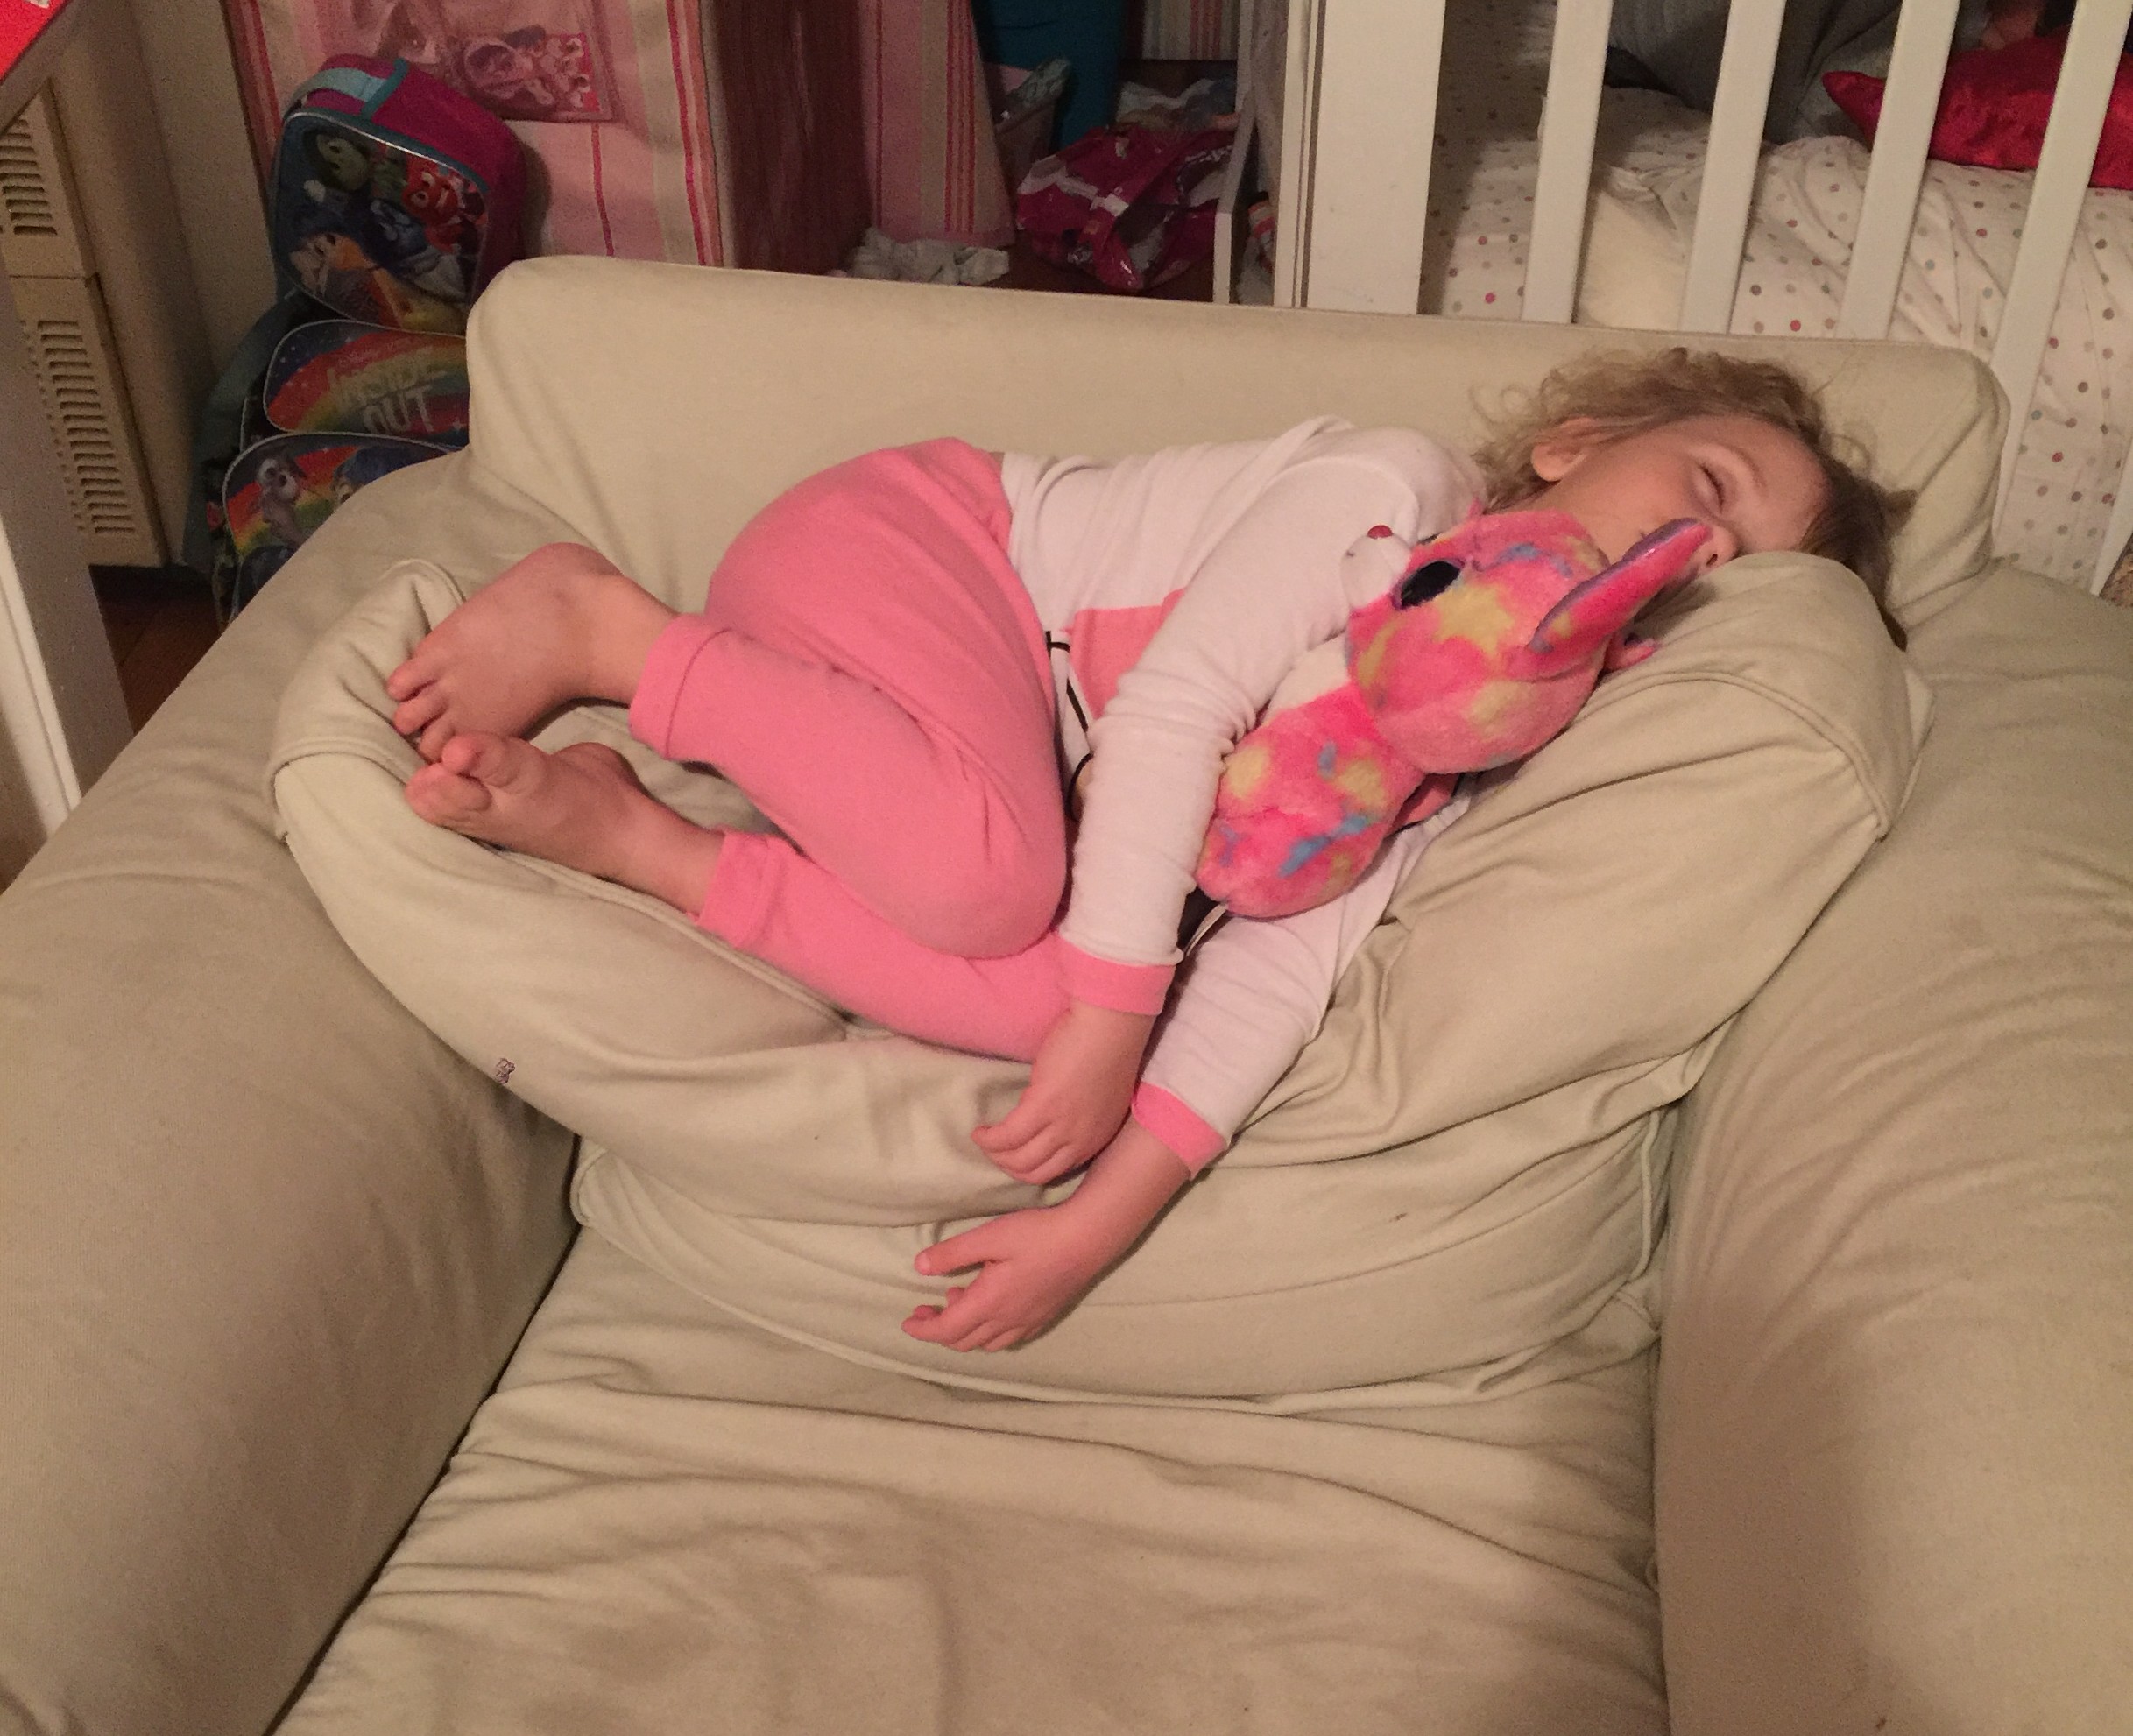 The same 4-year-old who didn't want to get up refused to get in her bed last night as she "wasn't sleepy" --- as shown by this picture taken 10 minutes after that statement. 